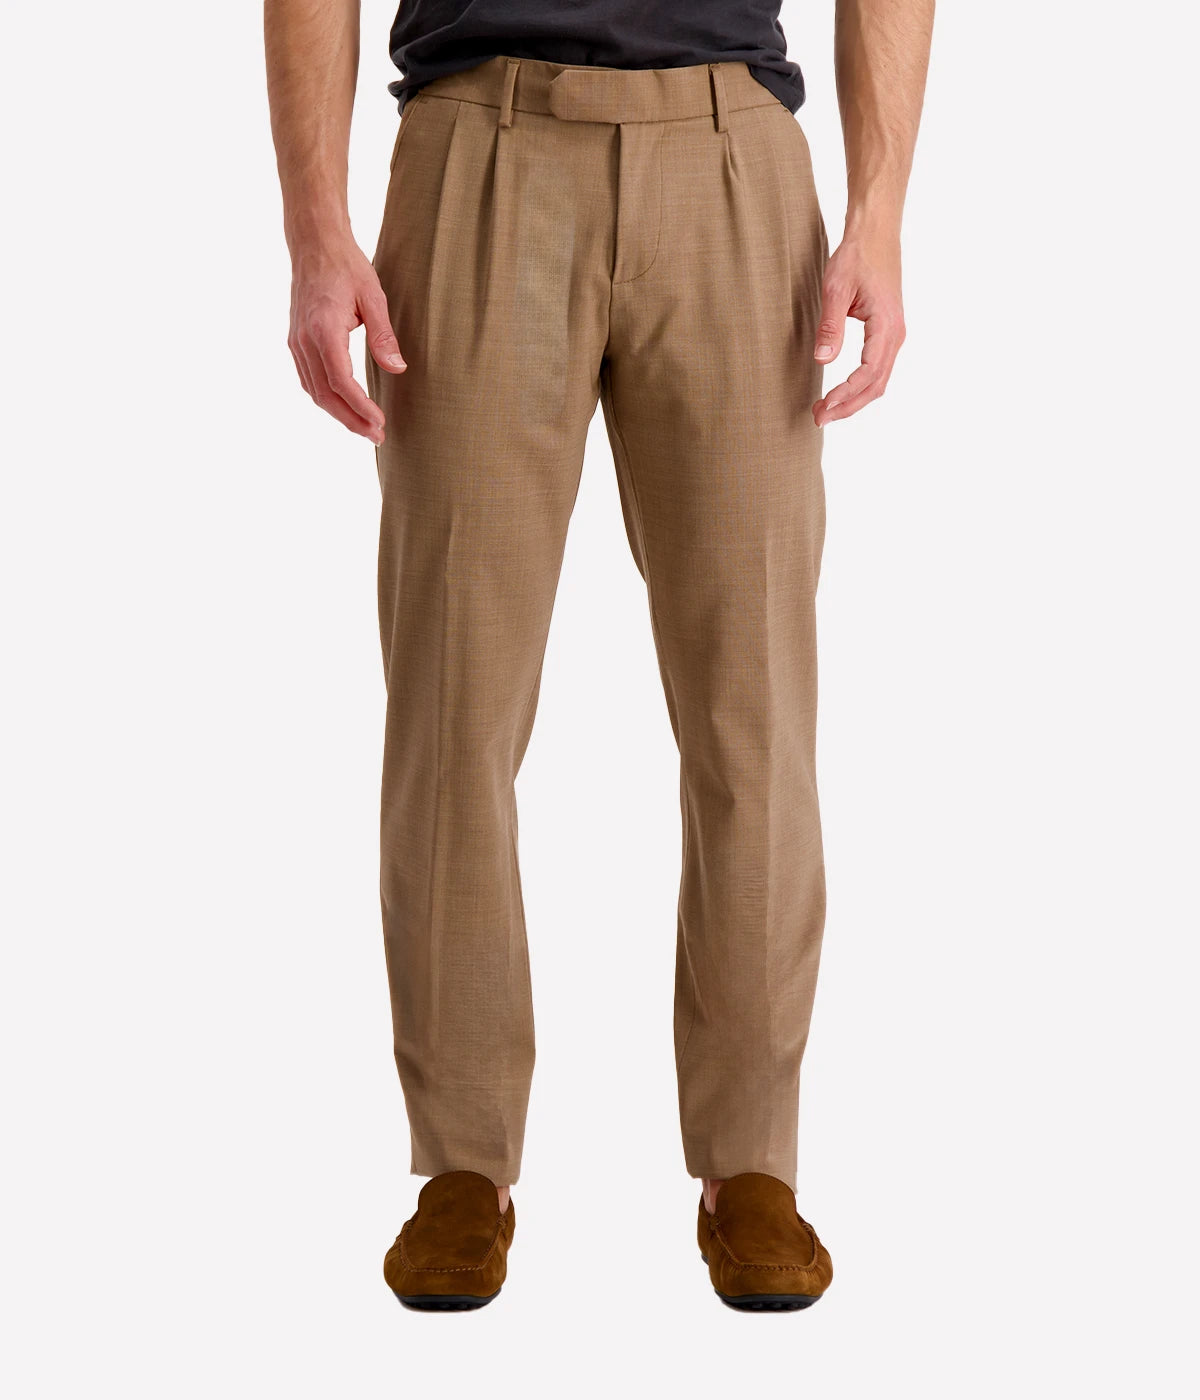 Suit Pant in Camel